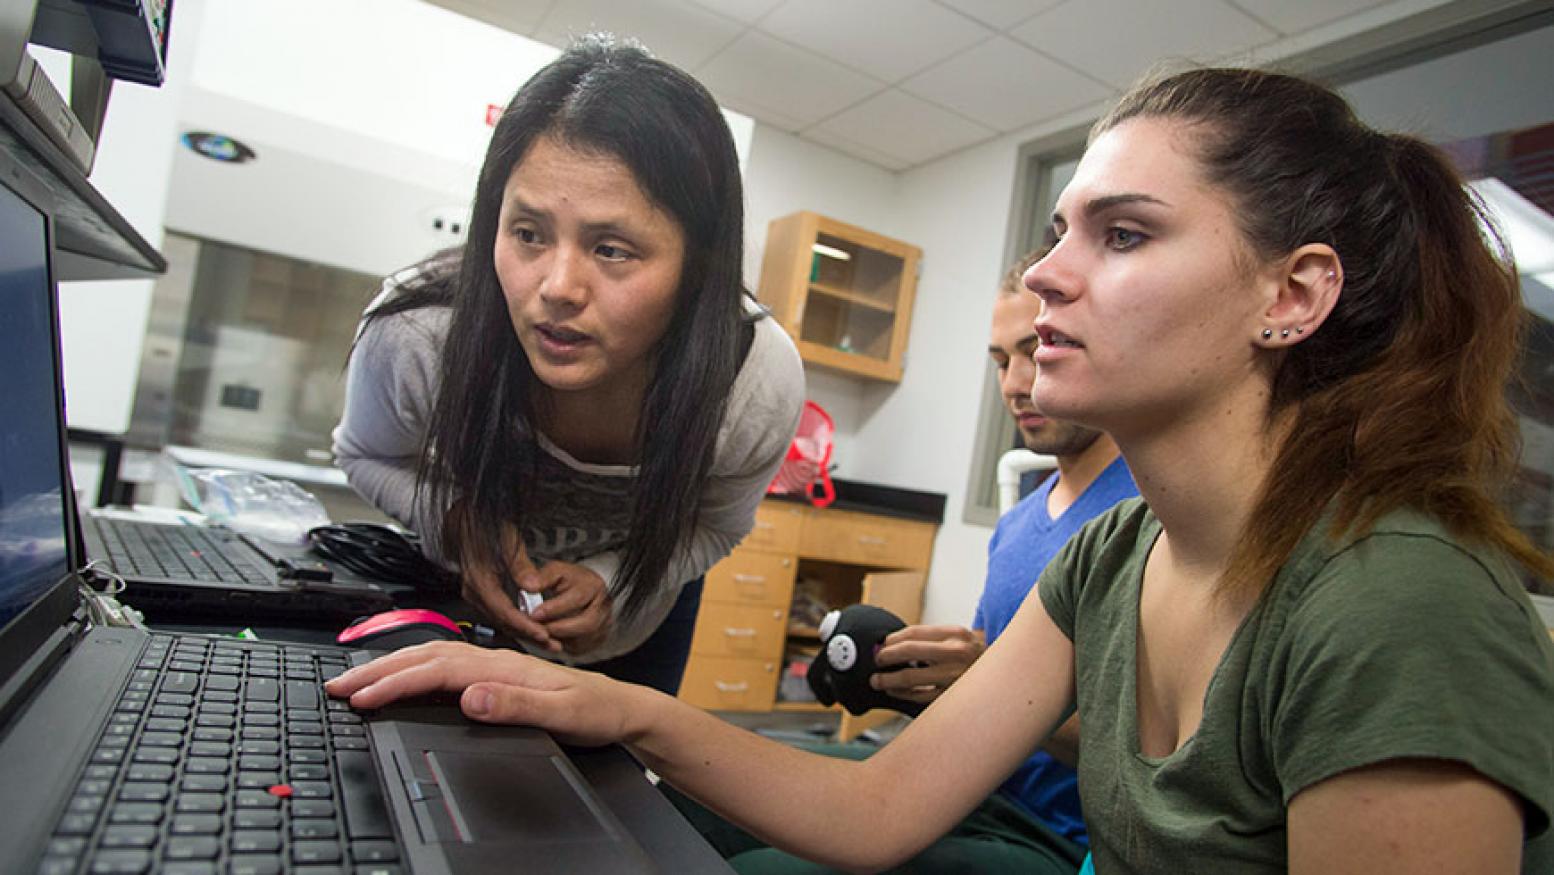 A female students looks at a computer while the professor leans over and examines her work. 